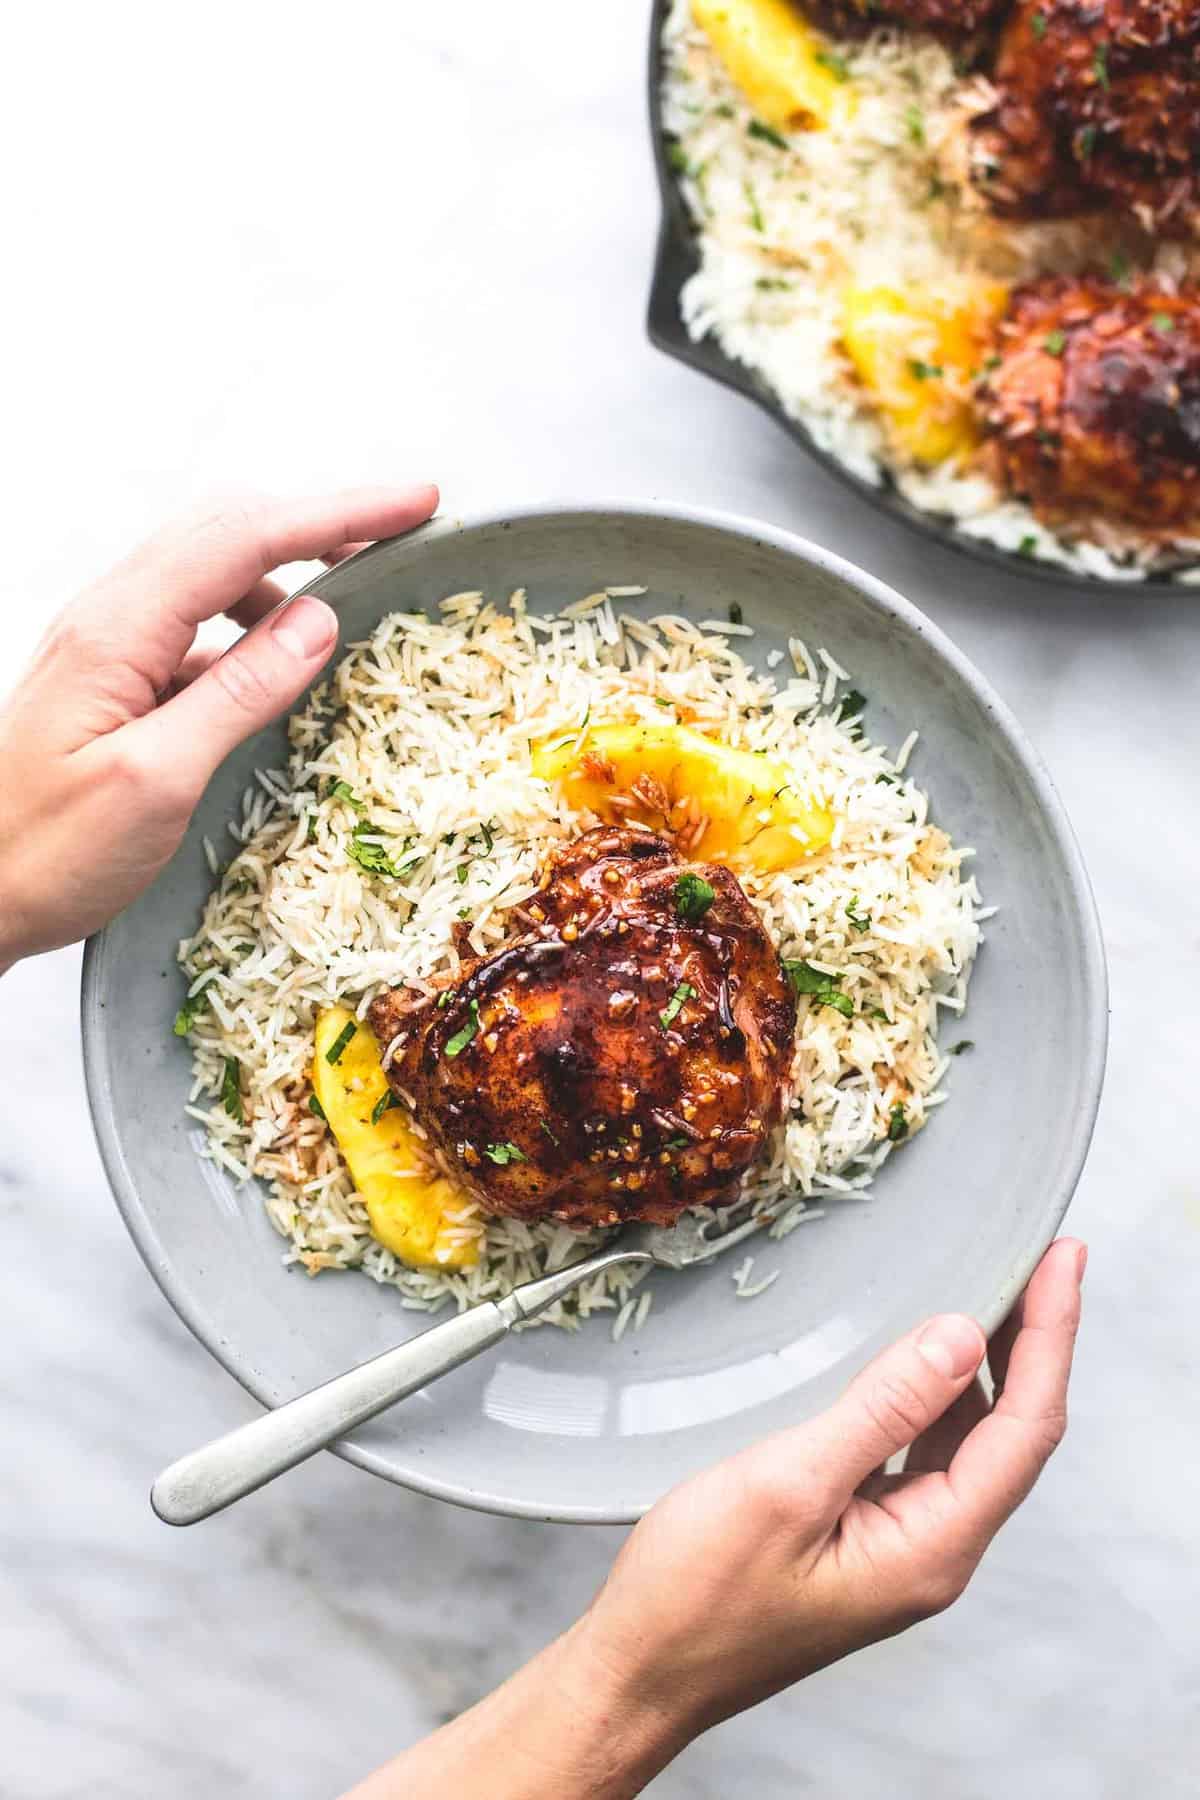 top view of a pair of hands holding a plate with Island glazed chicken and coconut rice and a fork on it with a pan of more rice and chicken on the side.